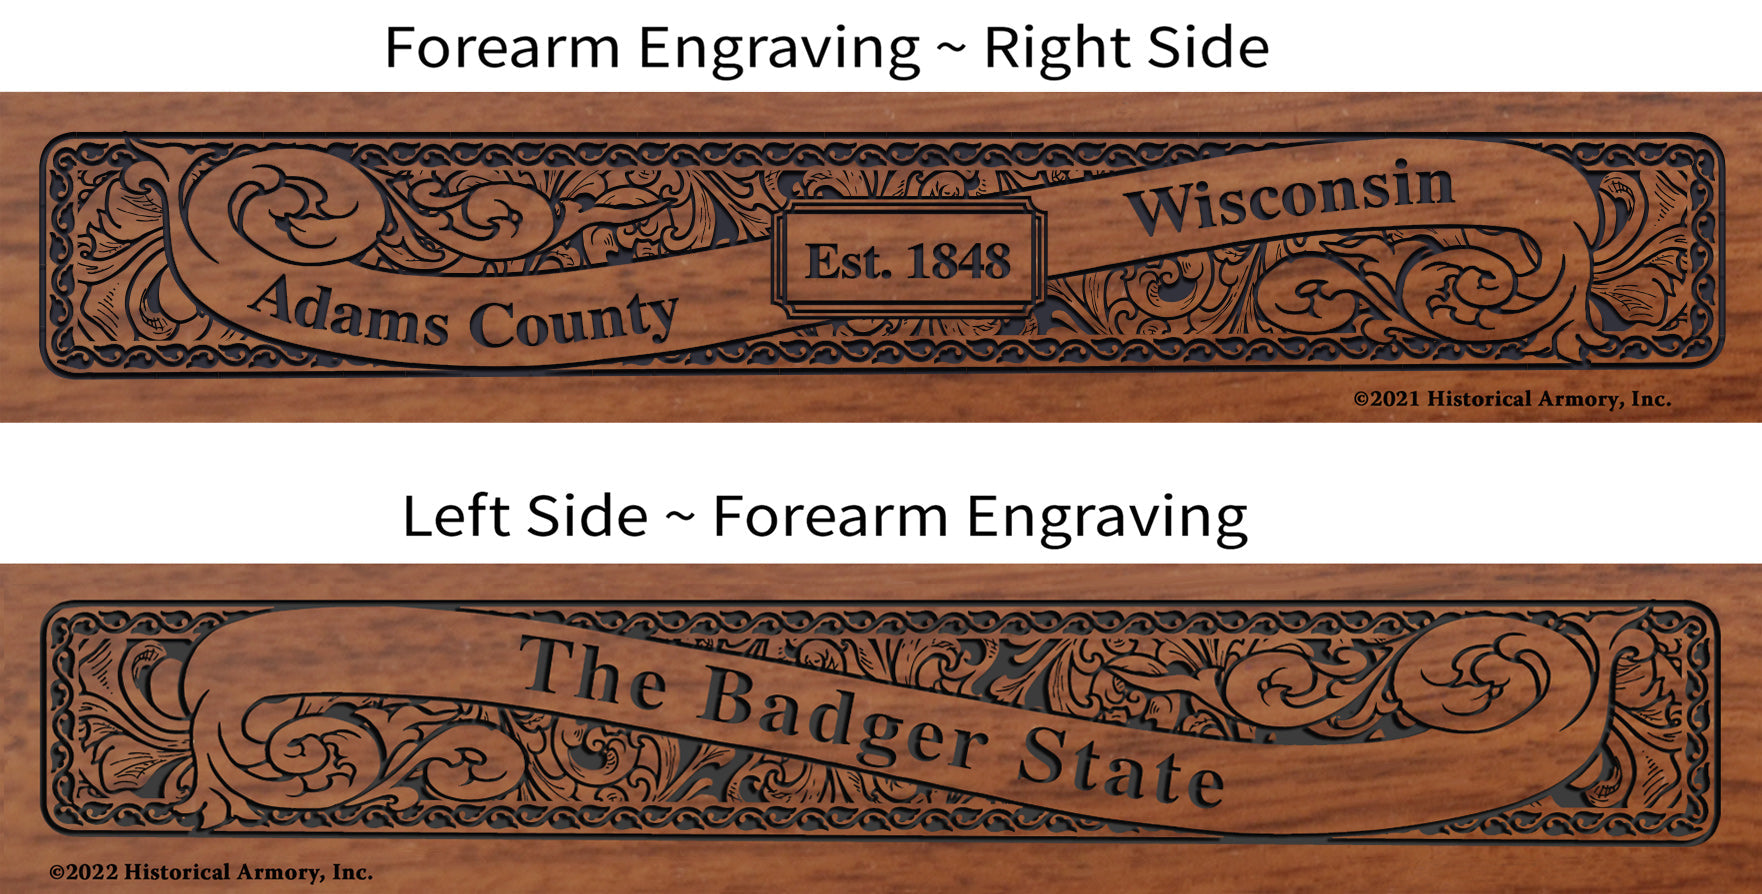 Adams County Wisconsin Engraved Rifle Forearm